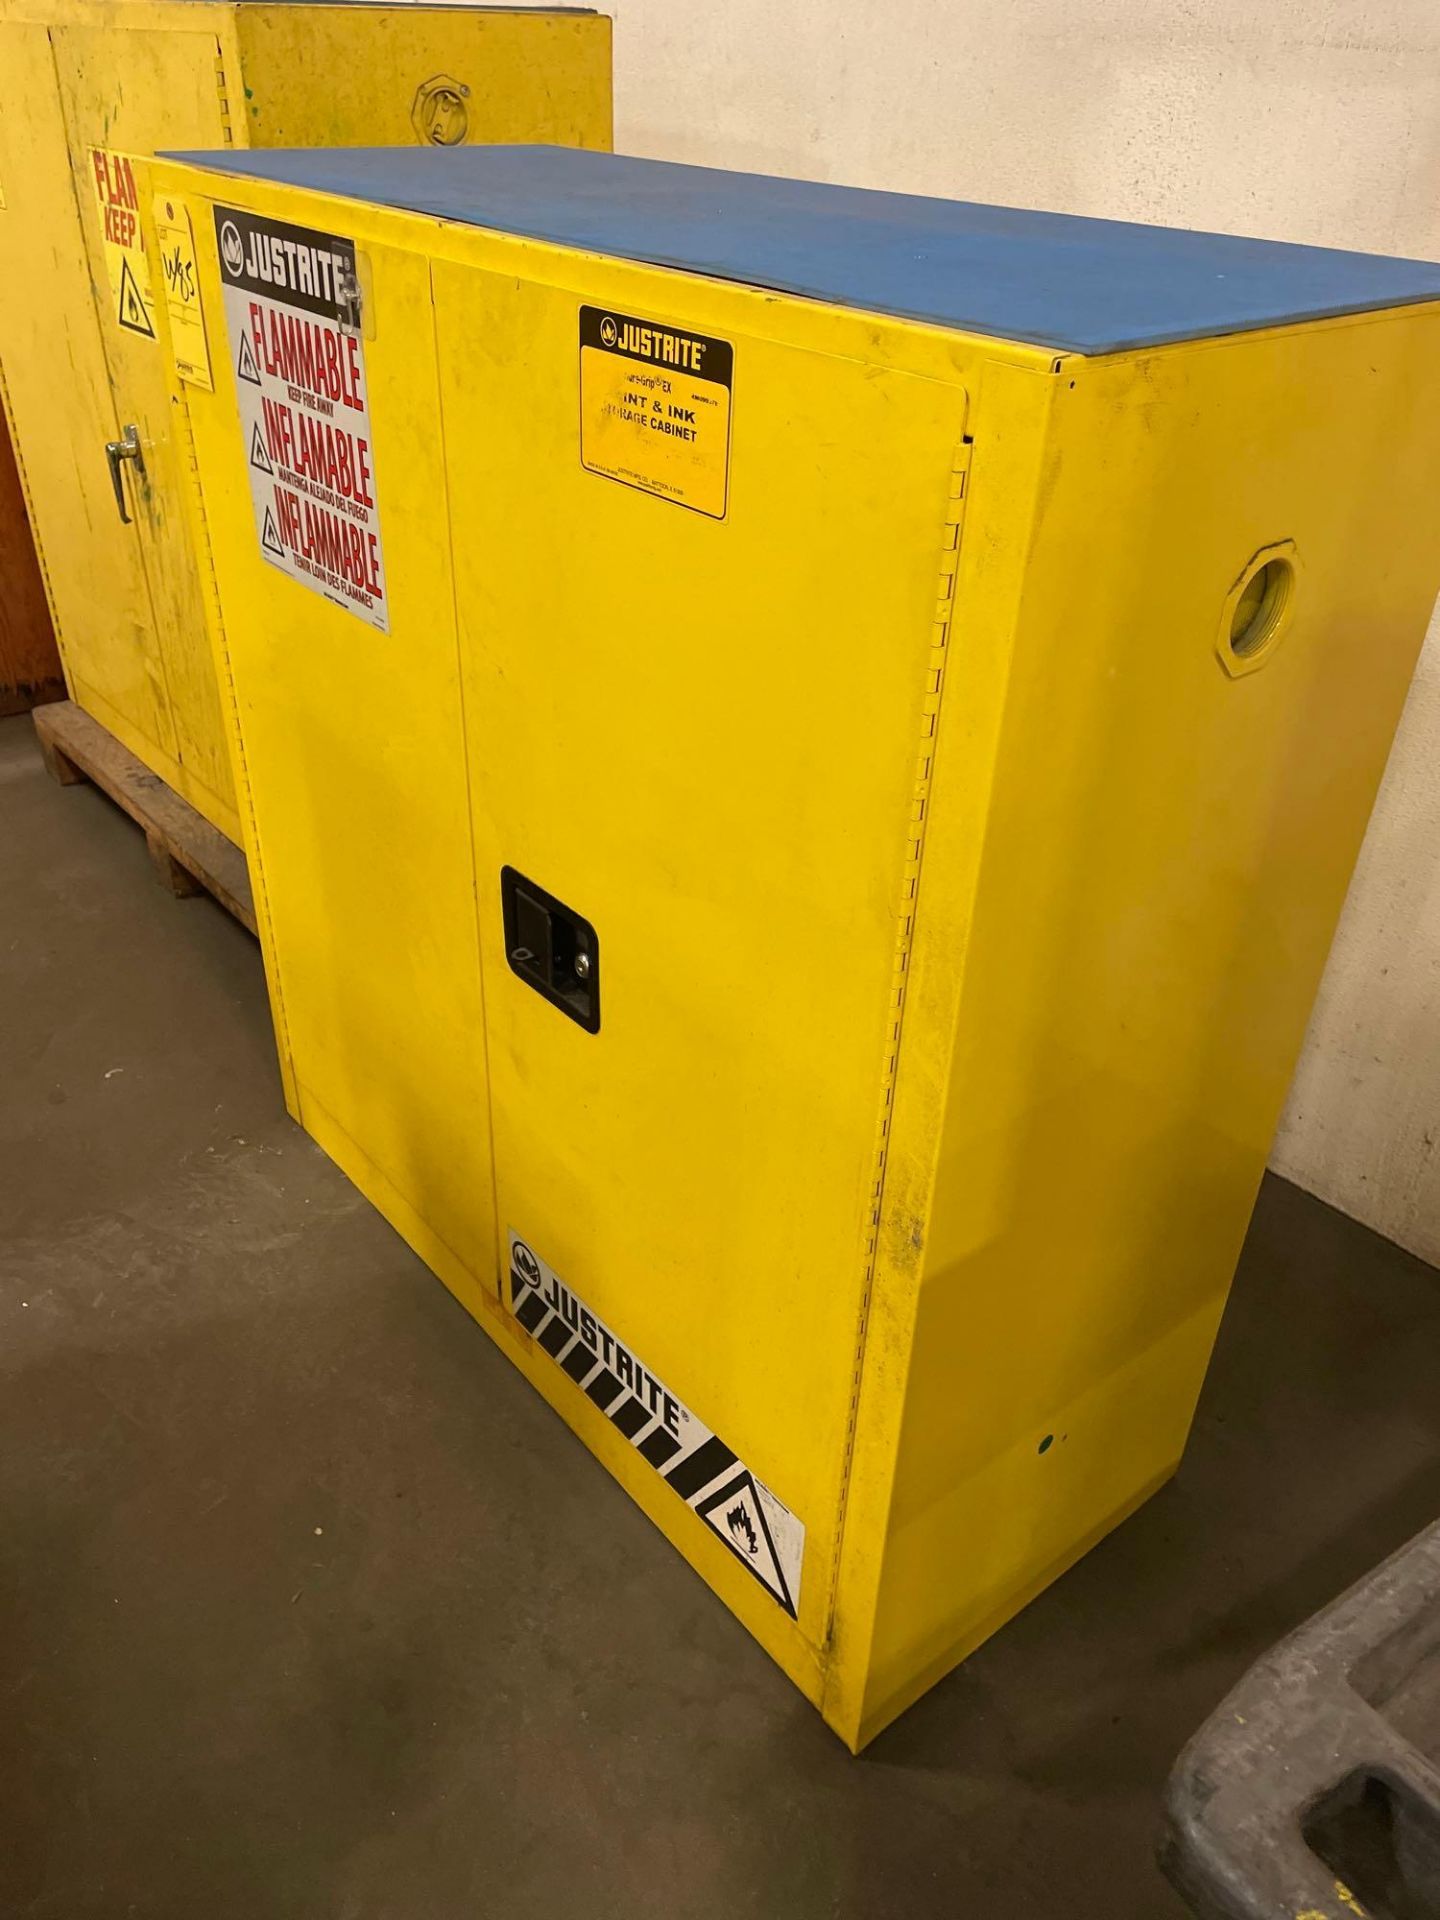 Lot of 2: (1) Just Rite Flammable Cabinets, (1) Eagle Flammable Cabinet, 43" X 18" X 45" - Image 6 of 6